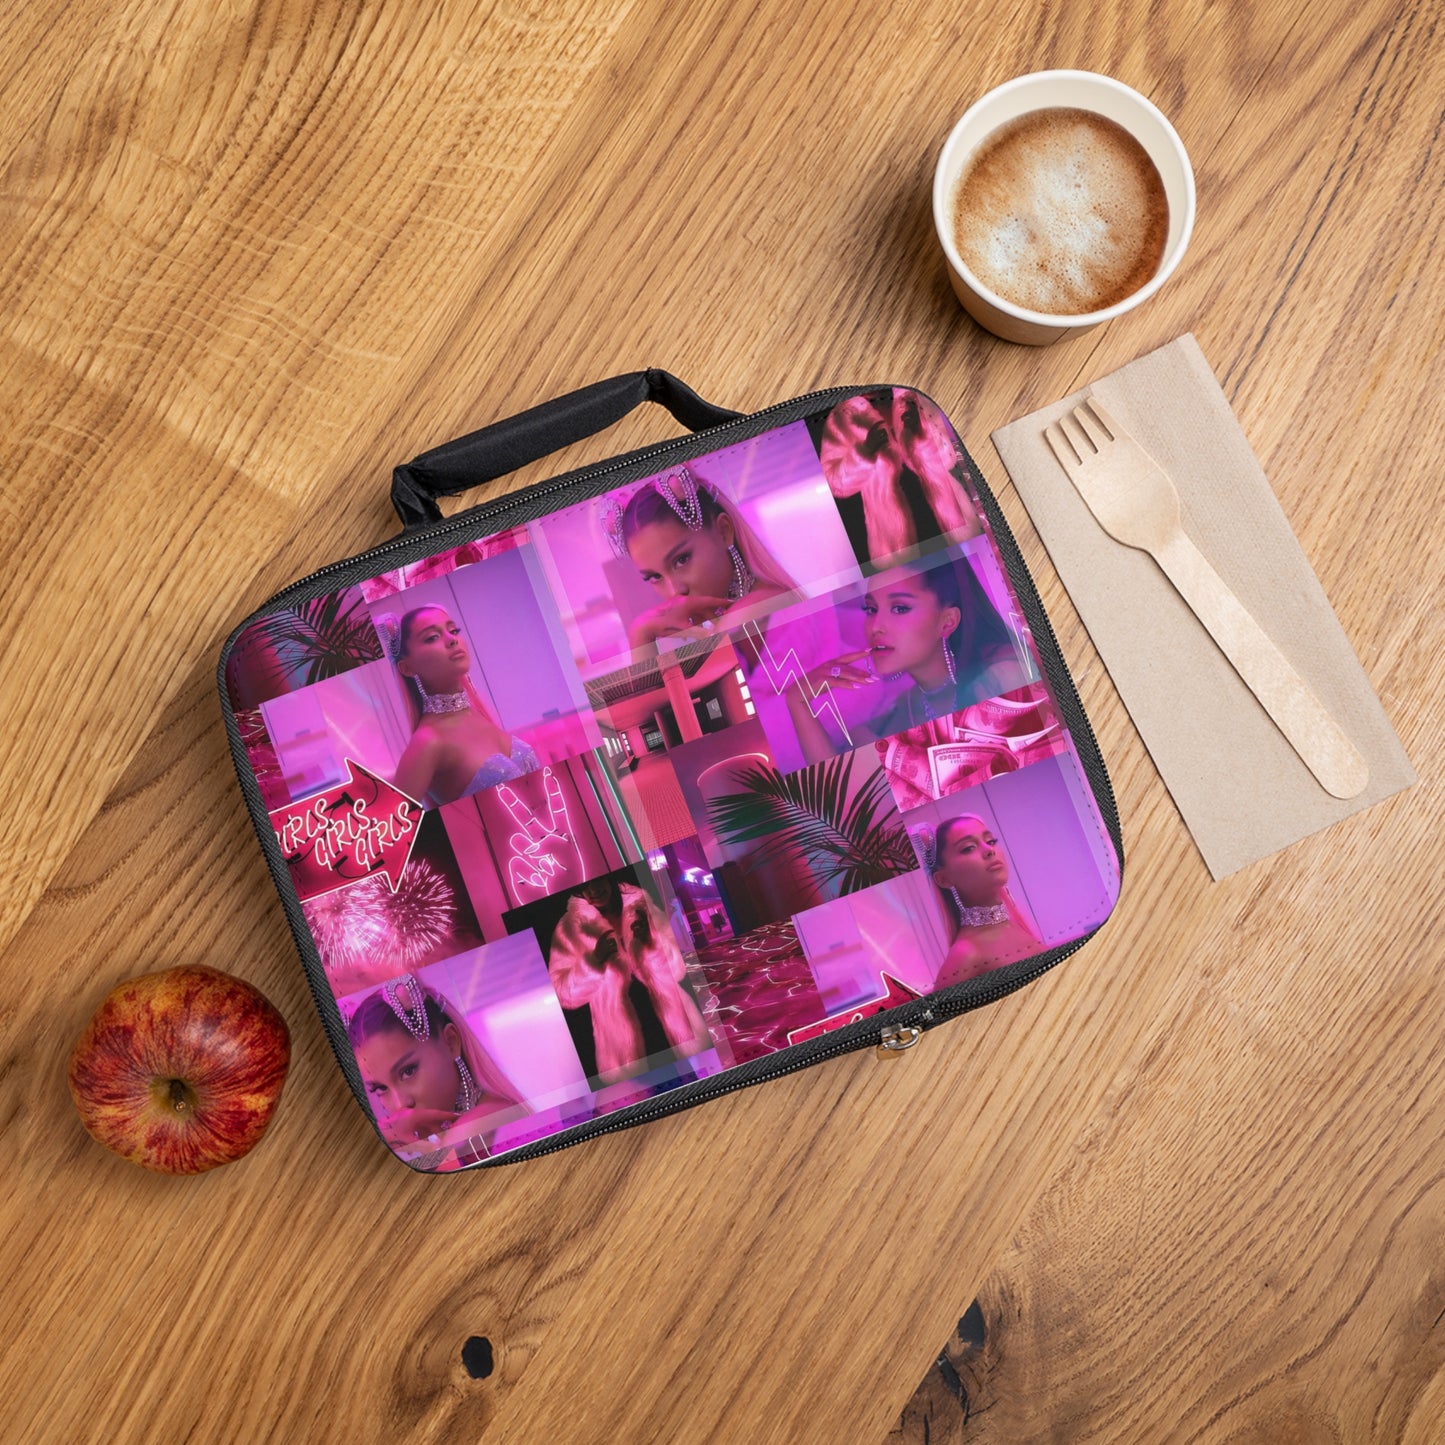 Ariana Grande 7 Rings Collage Lunch Bag